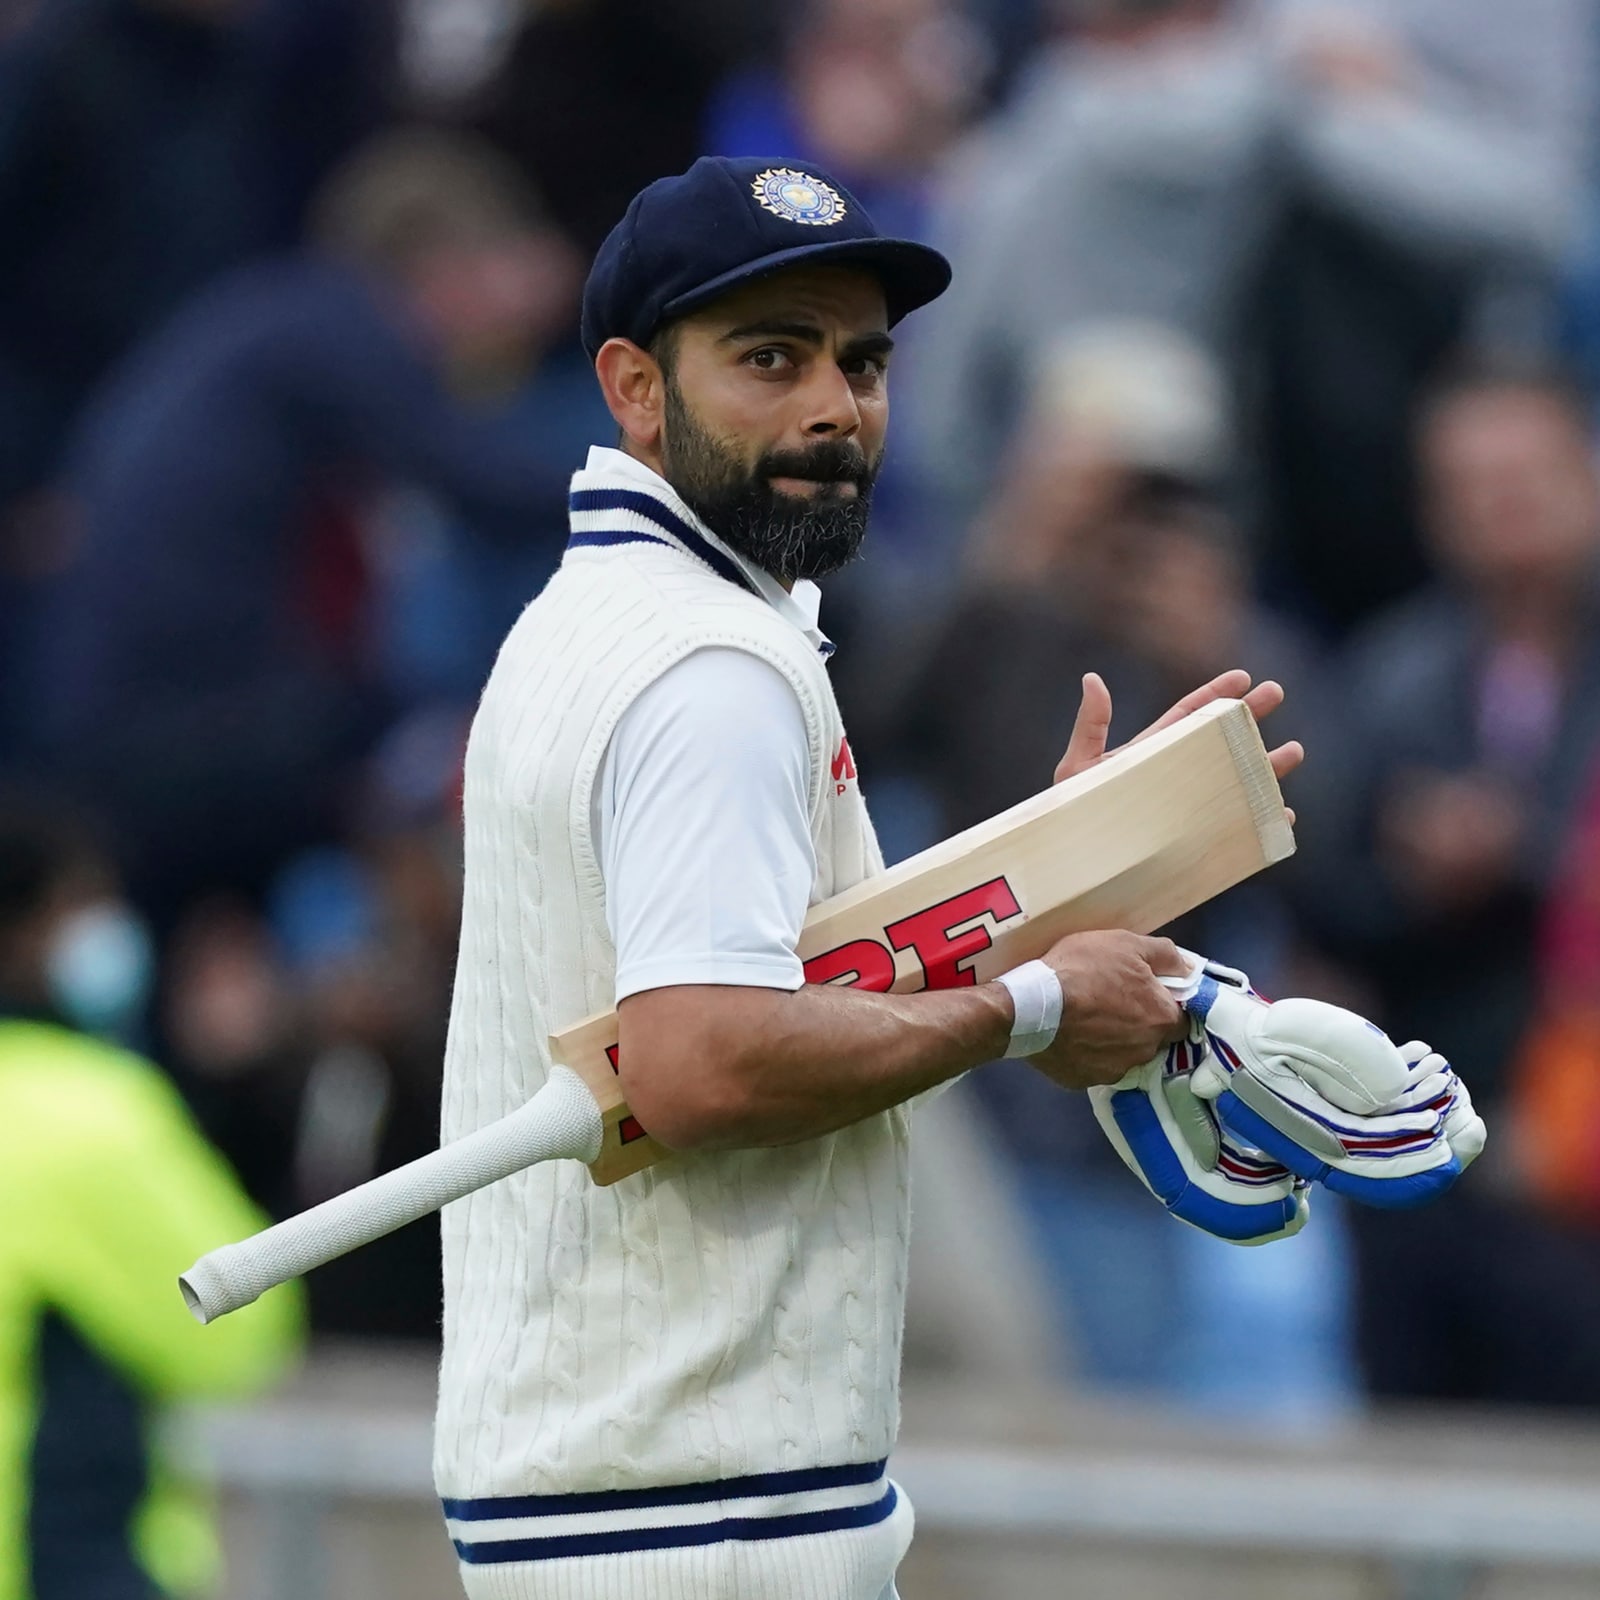 India Vs England: 'One Of Virat Kohli'S Big Problems Has Been The Balance Of His Side', Says Nasser Hussain